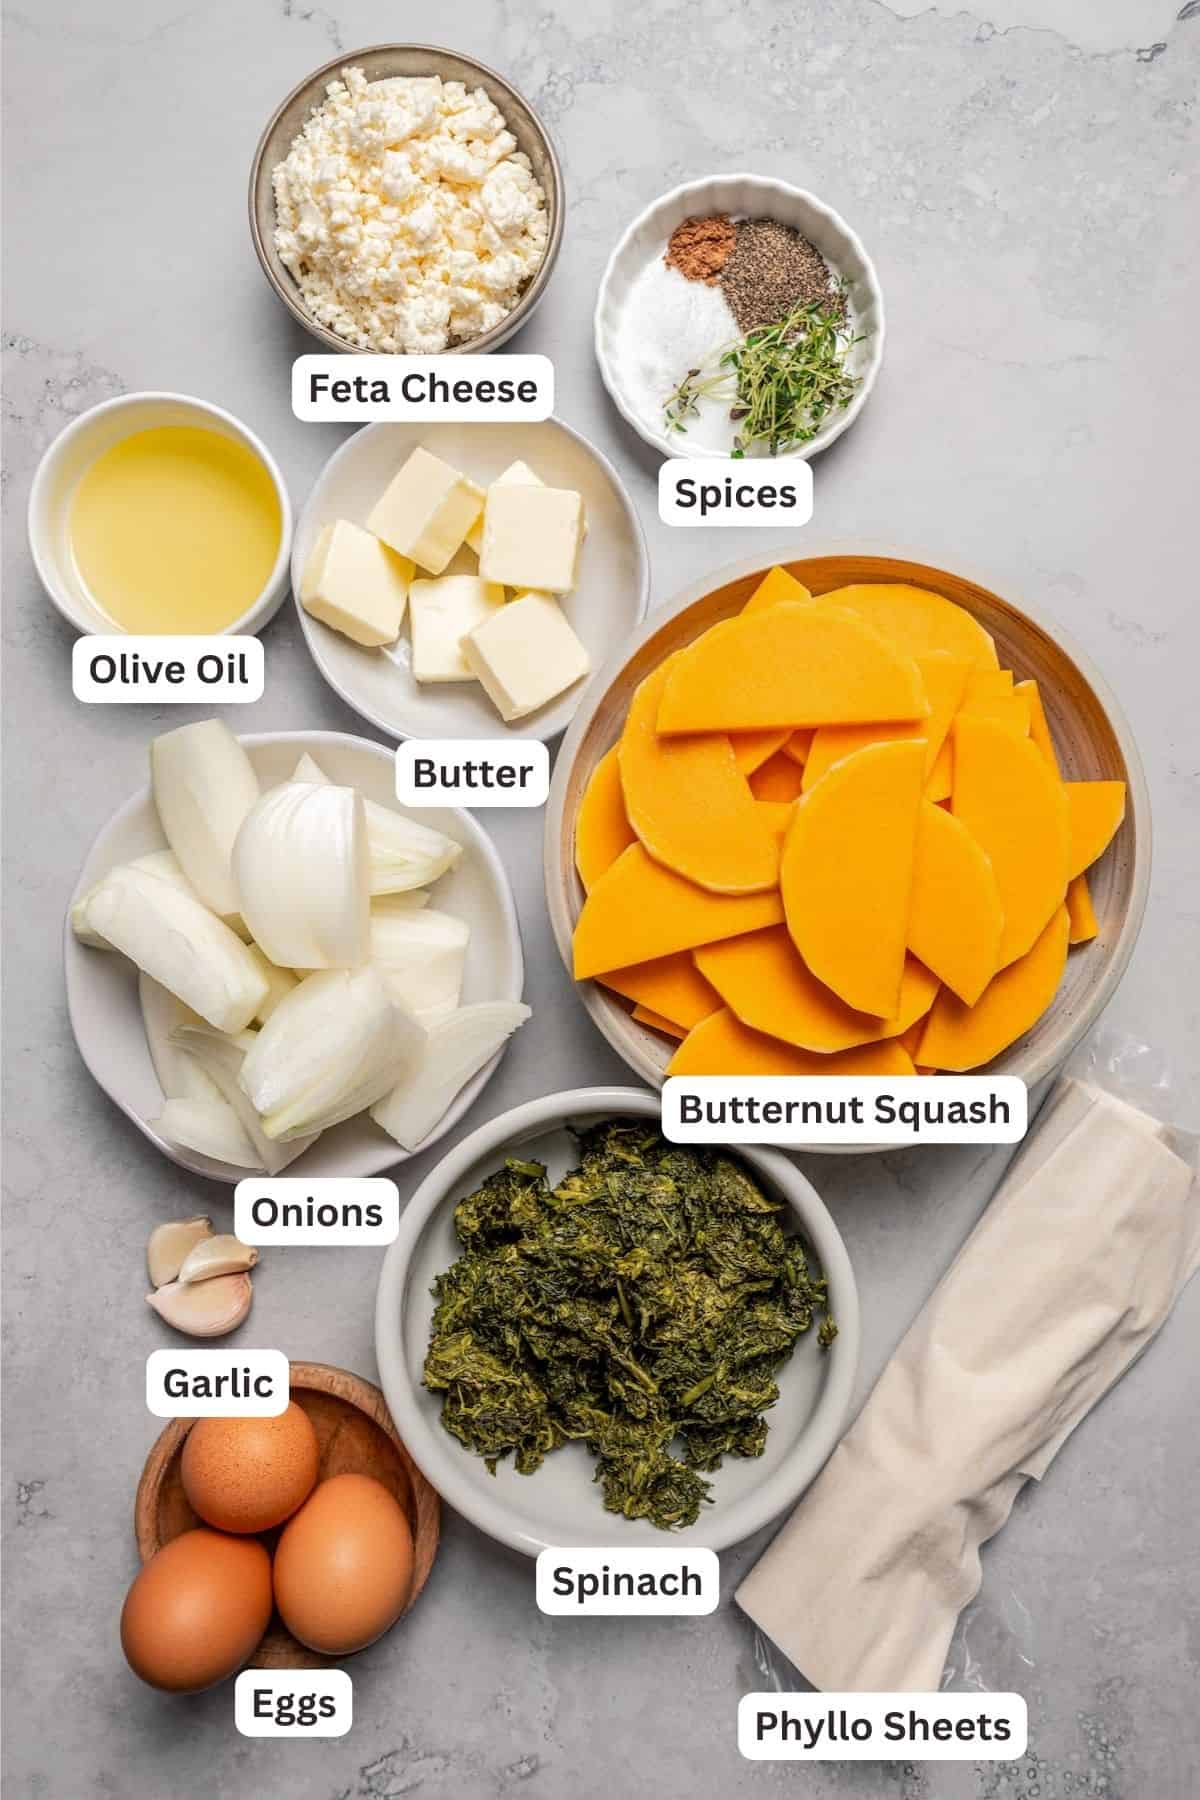 Ingredients for Butternut Squash and Spinach Pie.